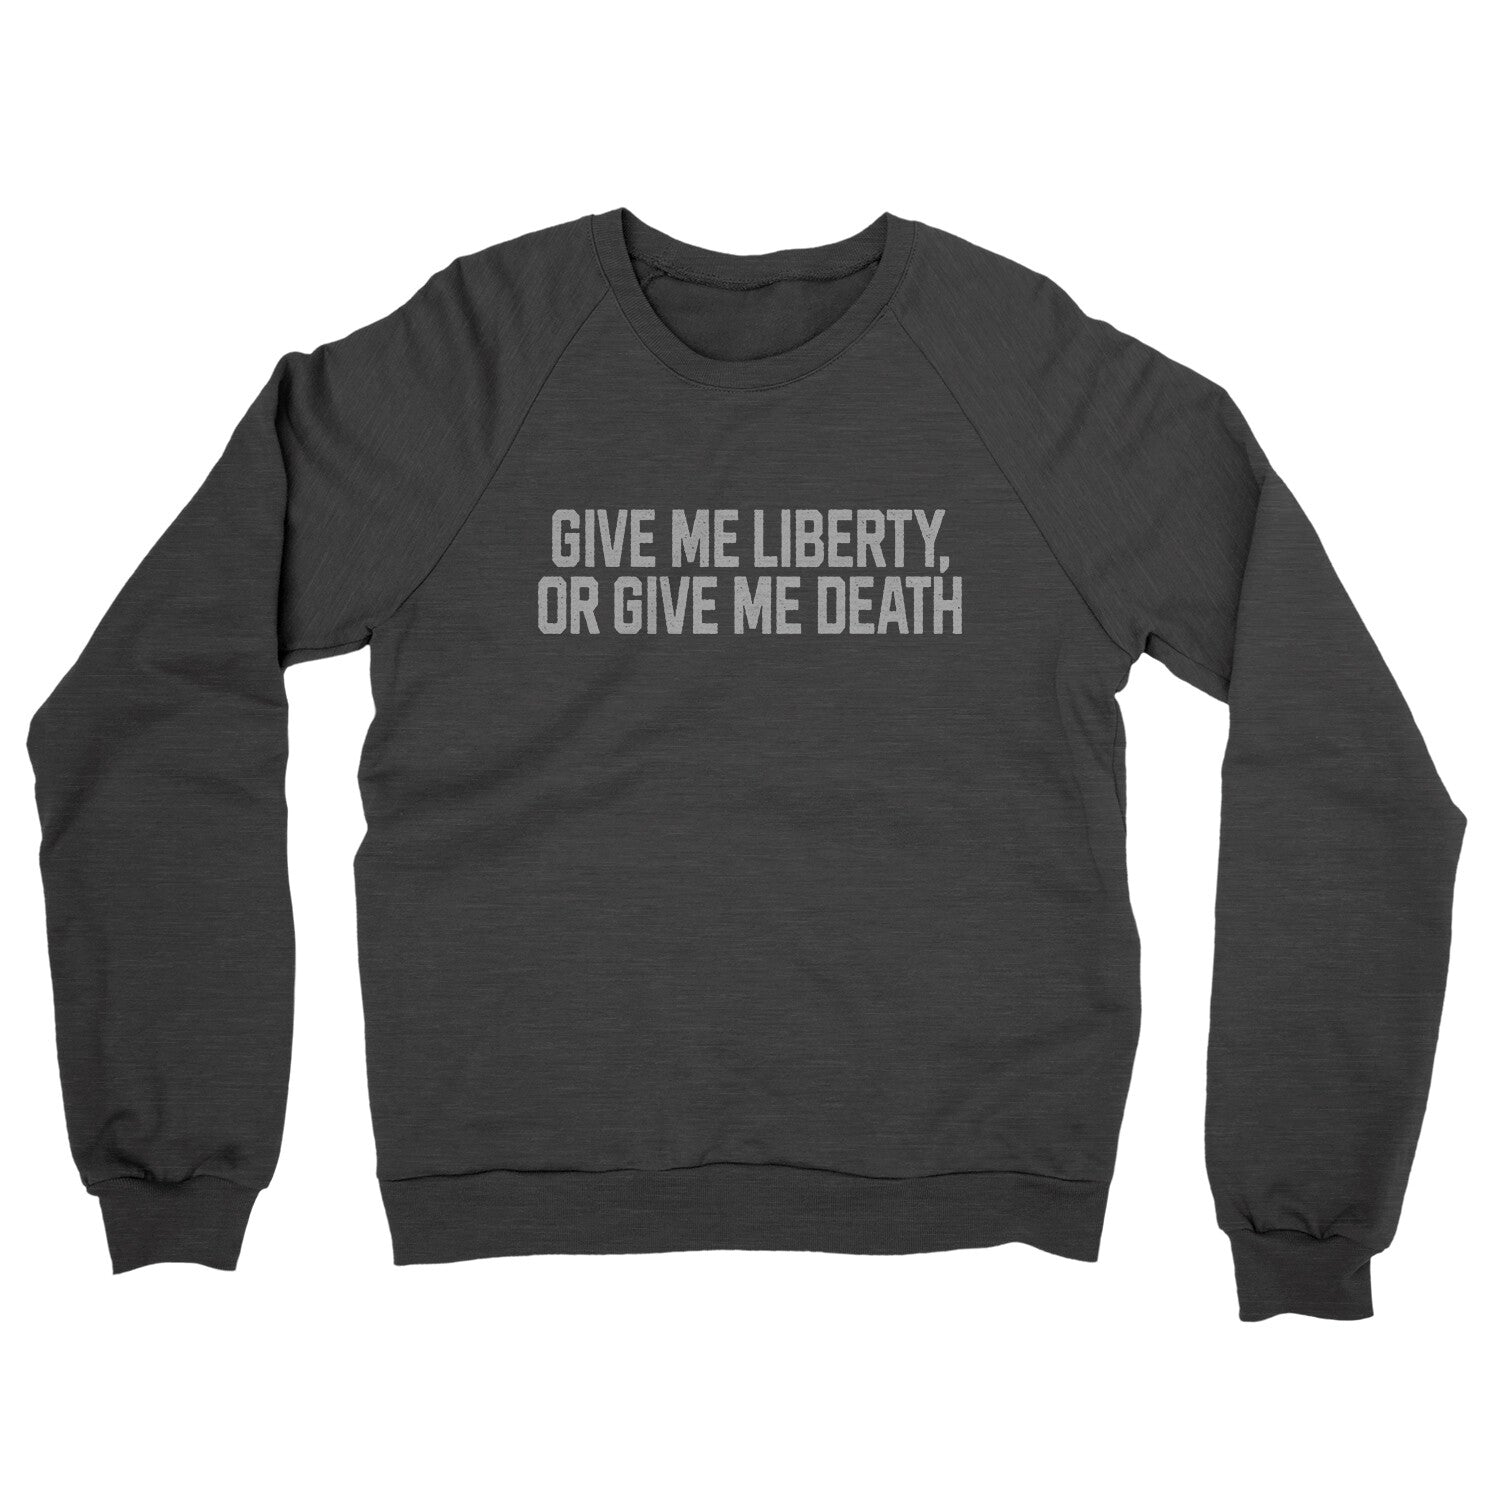 Give Me Liberty or Give Me Death in Charcoal Heather Color